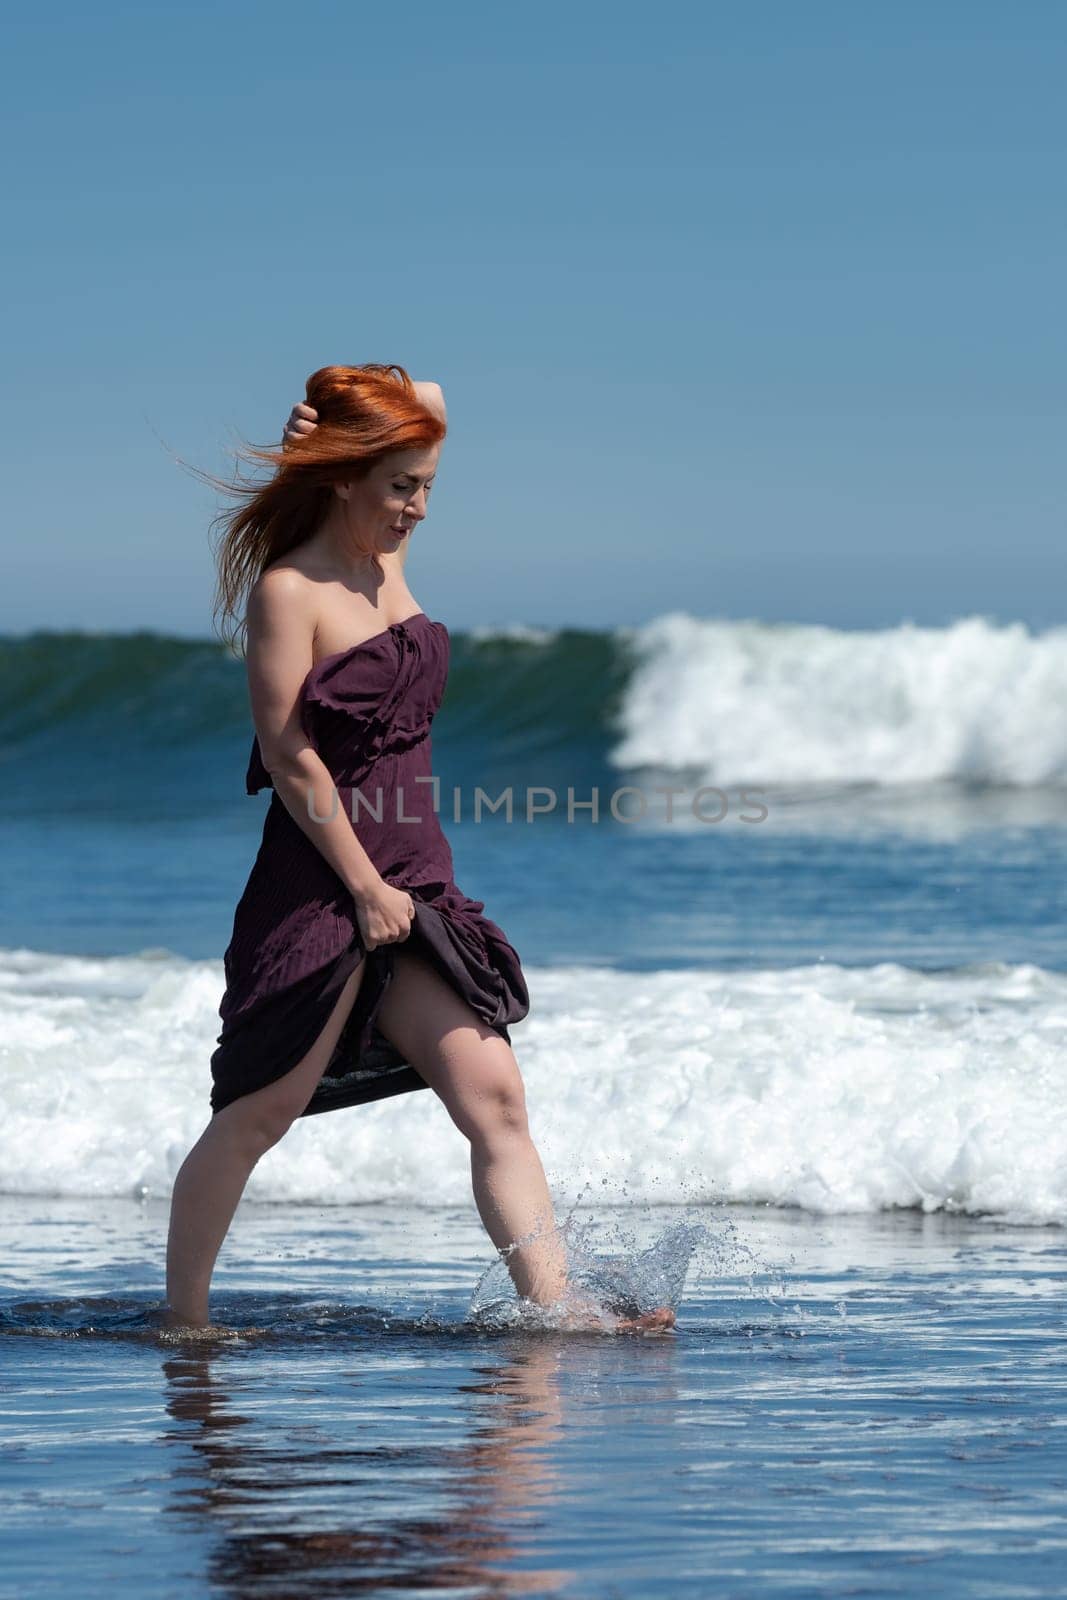 Happy redhead woman enjoying summer holidays walking ankle deep in water of breaking ocean waves on beach on sunny day. She looks stunning in dark puce long dress with knee high hem, moving barefoot